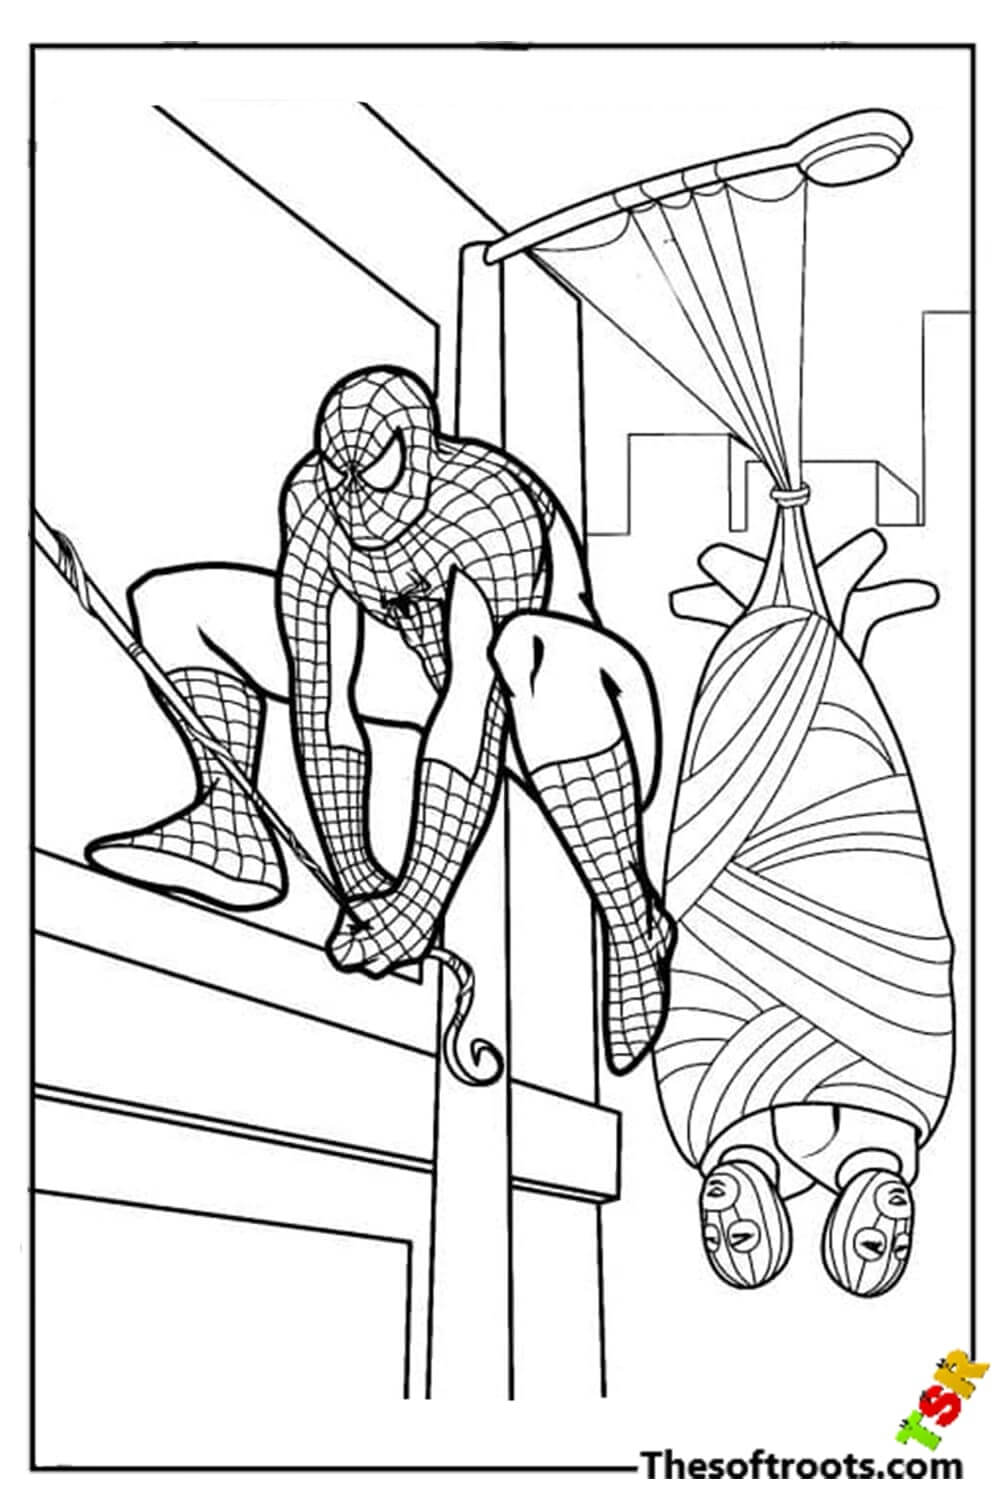 Thief and Spiderman coloring pages